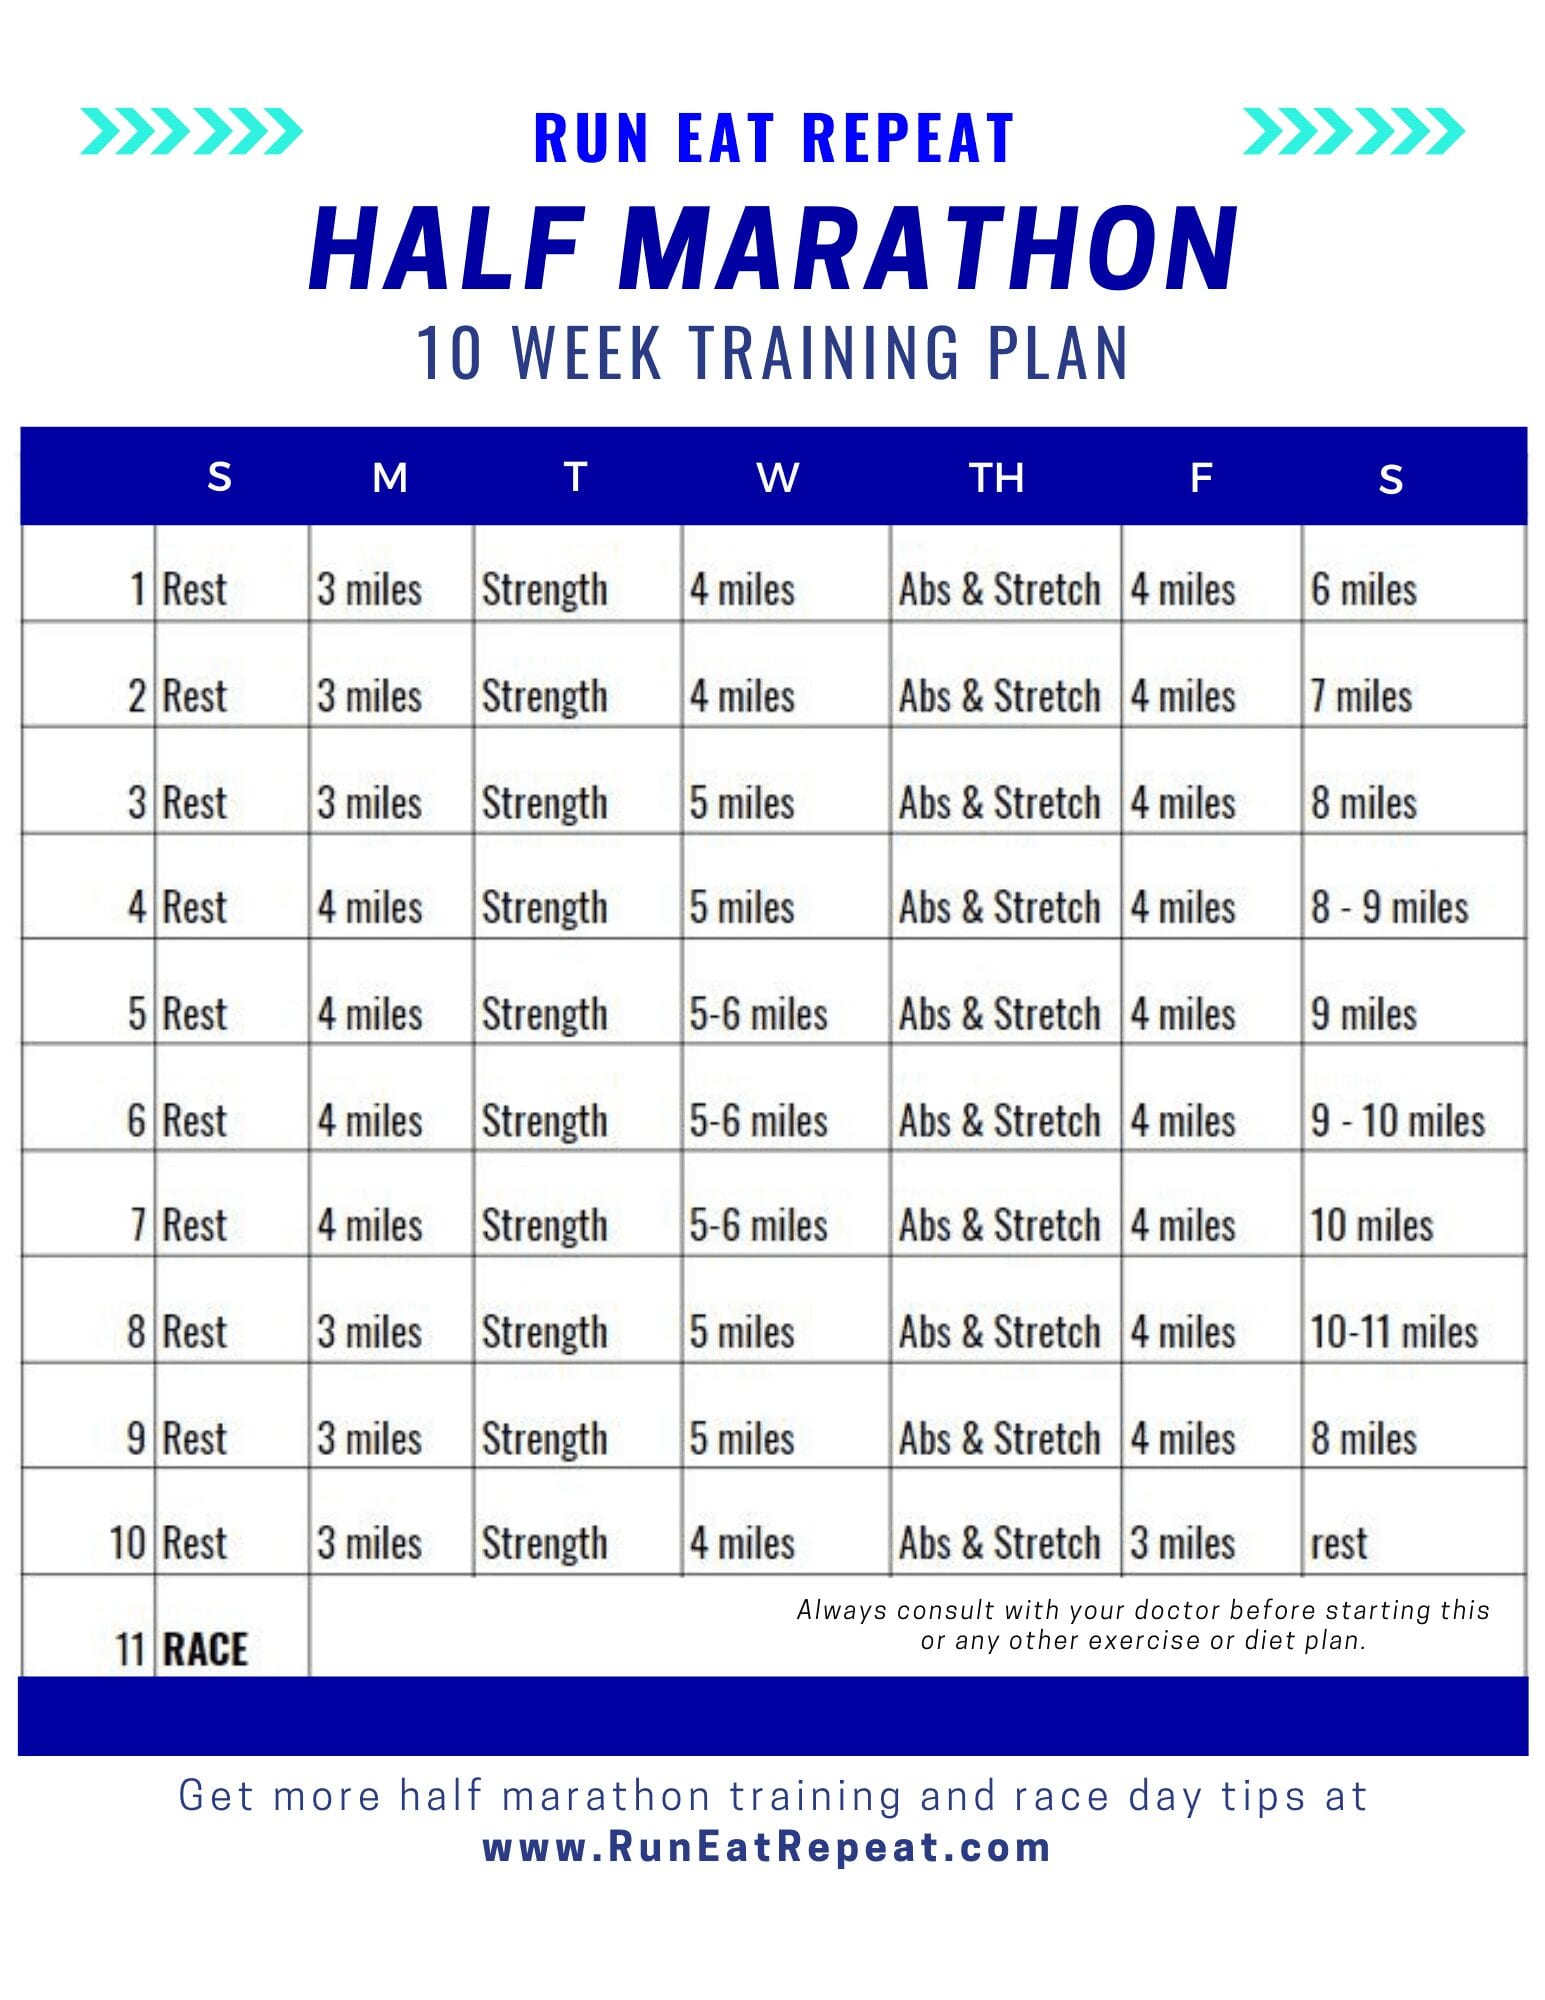 Half Marathon in 10 Weeks Training Plan and Packing List and Tips - Run Repeat